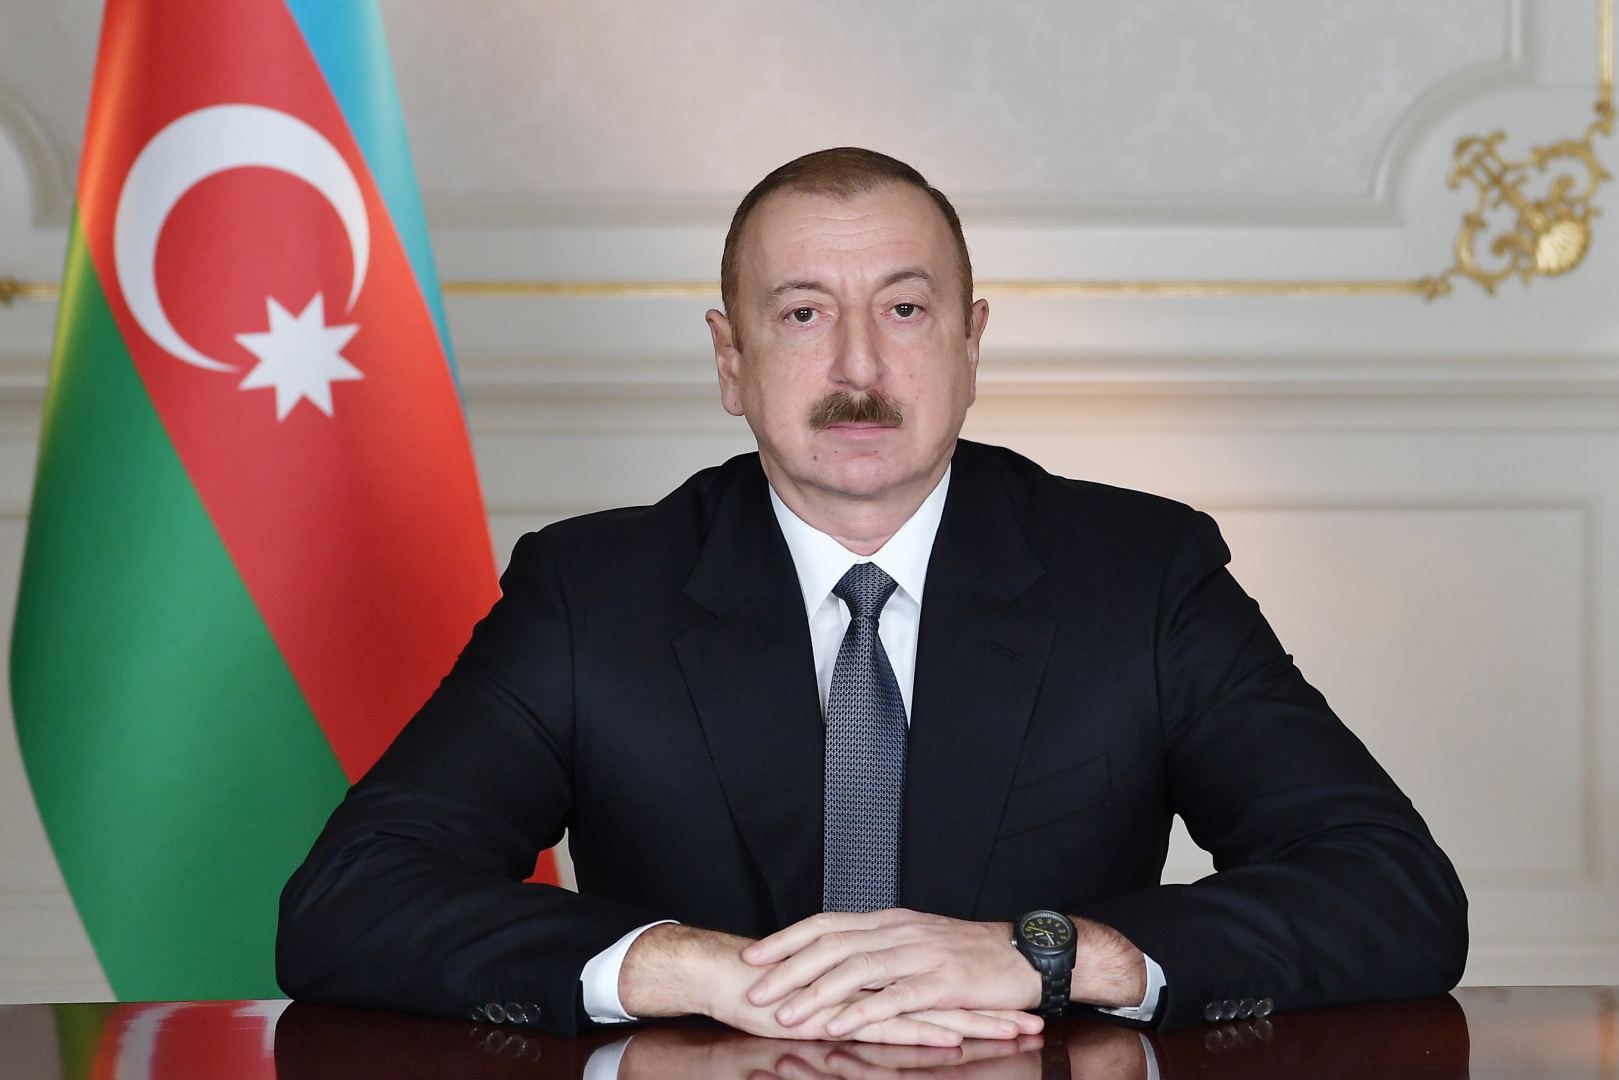 President Aliyev: We want to expand cooperation with British companies, as companies from friendly country